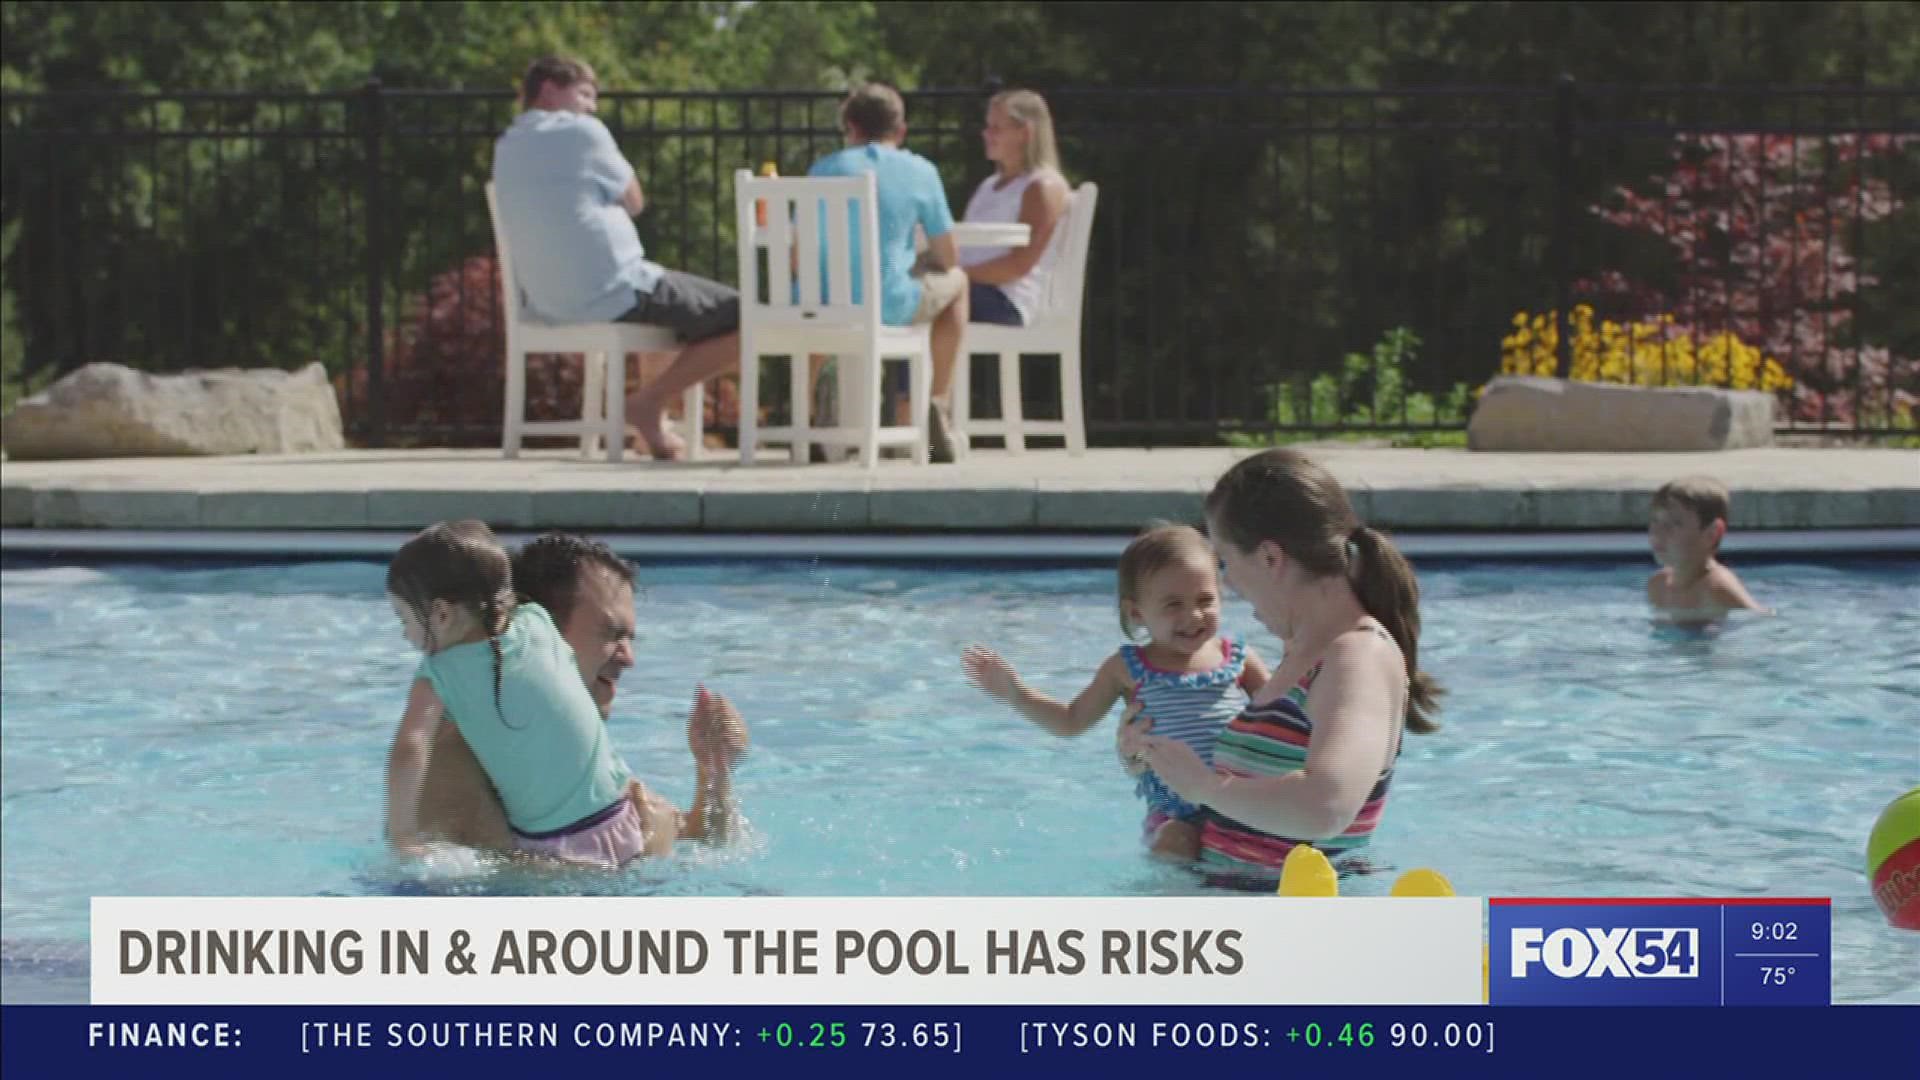 Planning on some time by the pool? Make sure you put safety first.